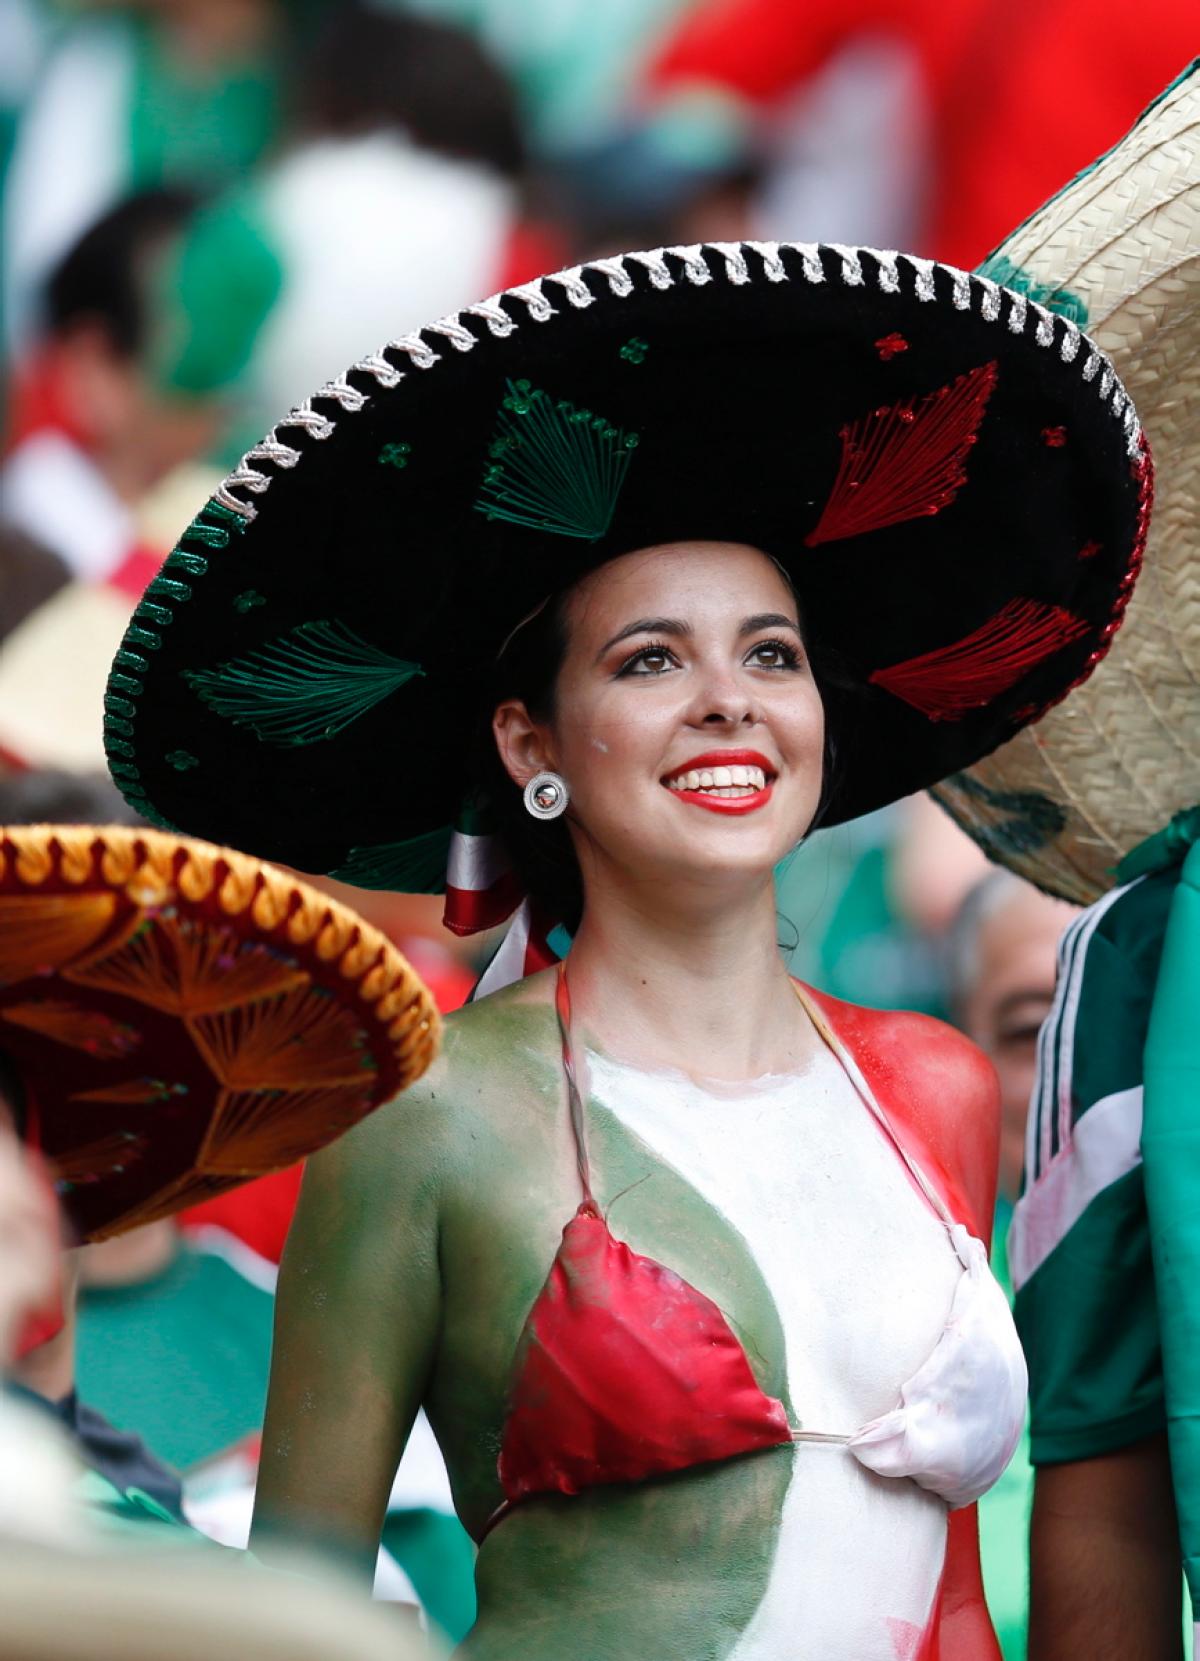 PHOTOS: The Hottest Fans At The 2014 World Cup (Slightly NSFW) – Page 3